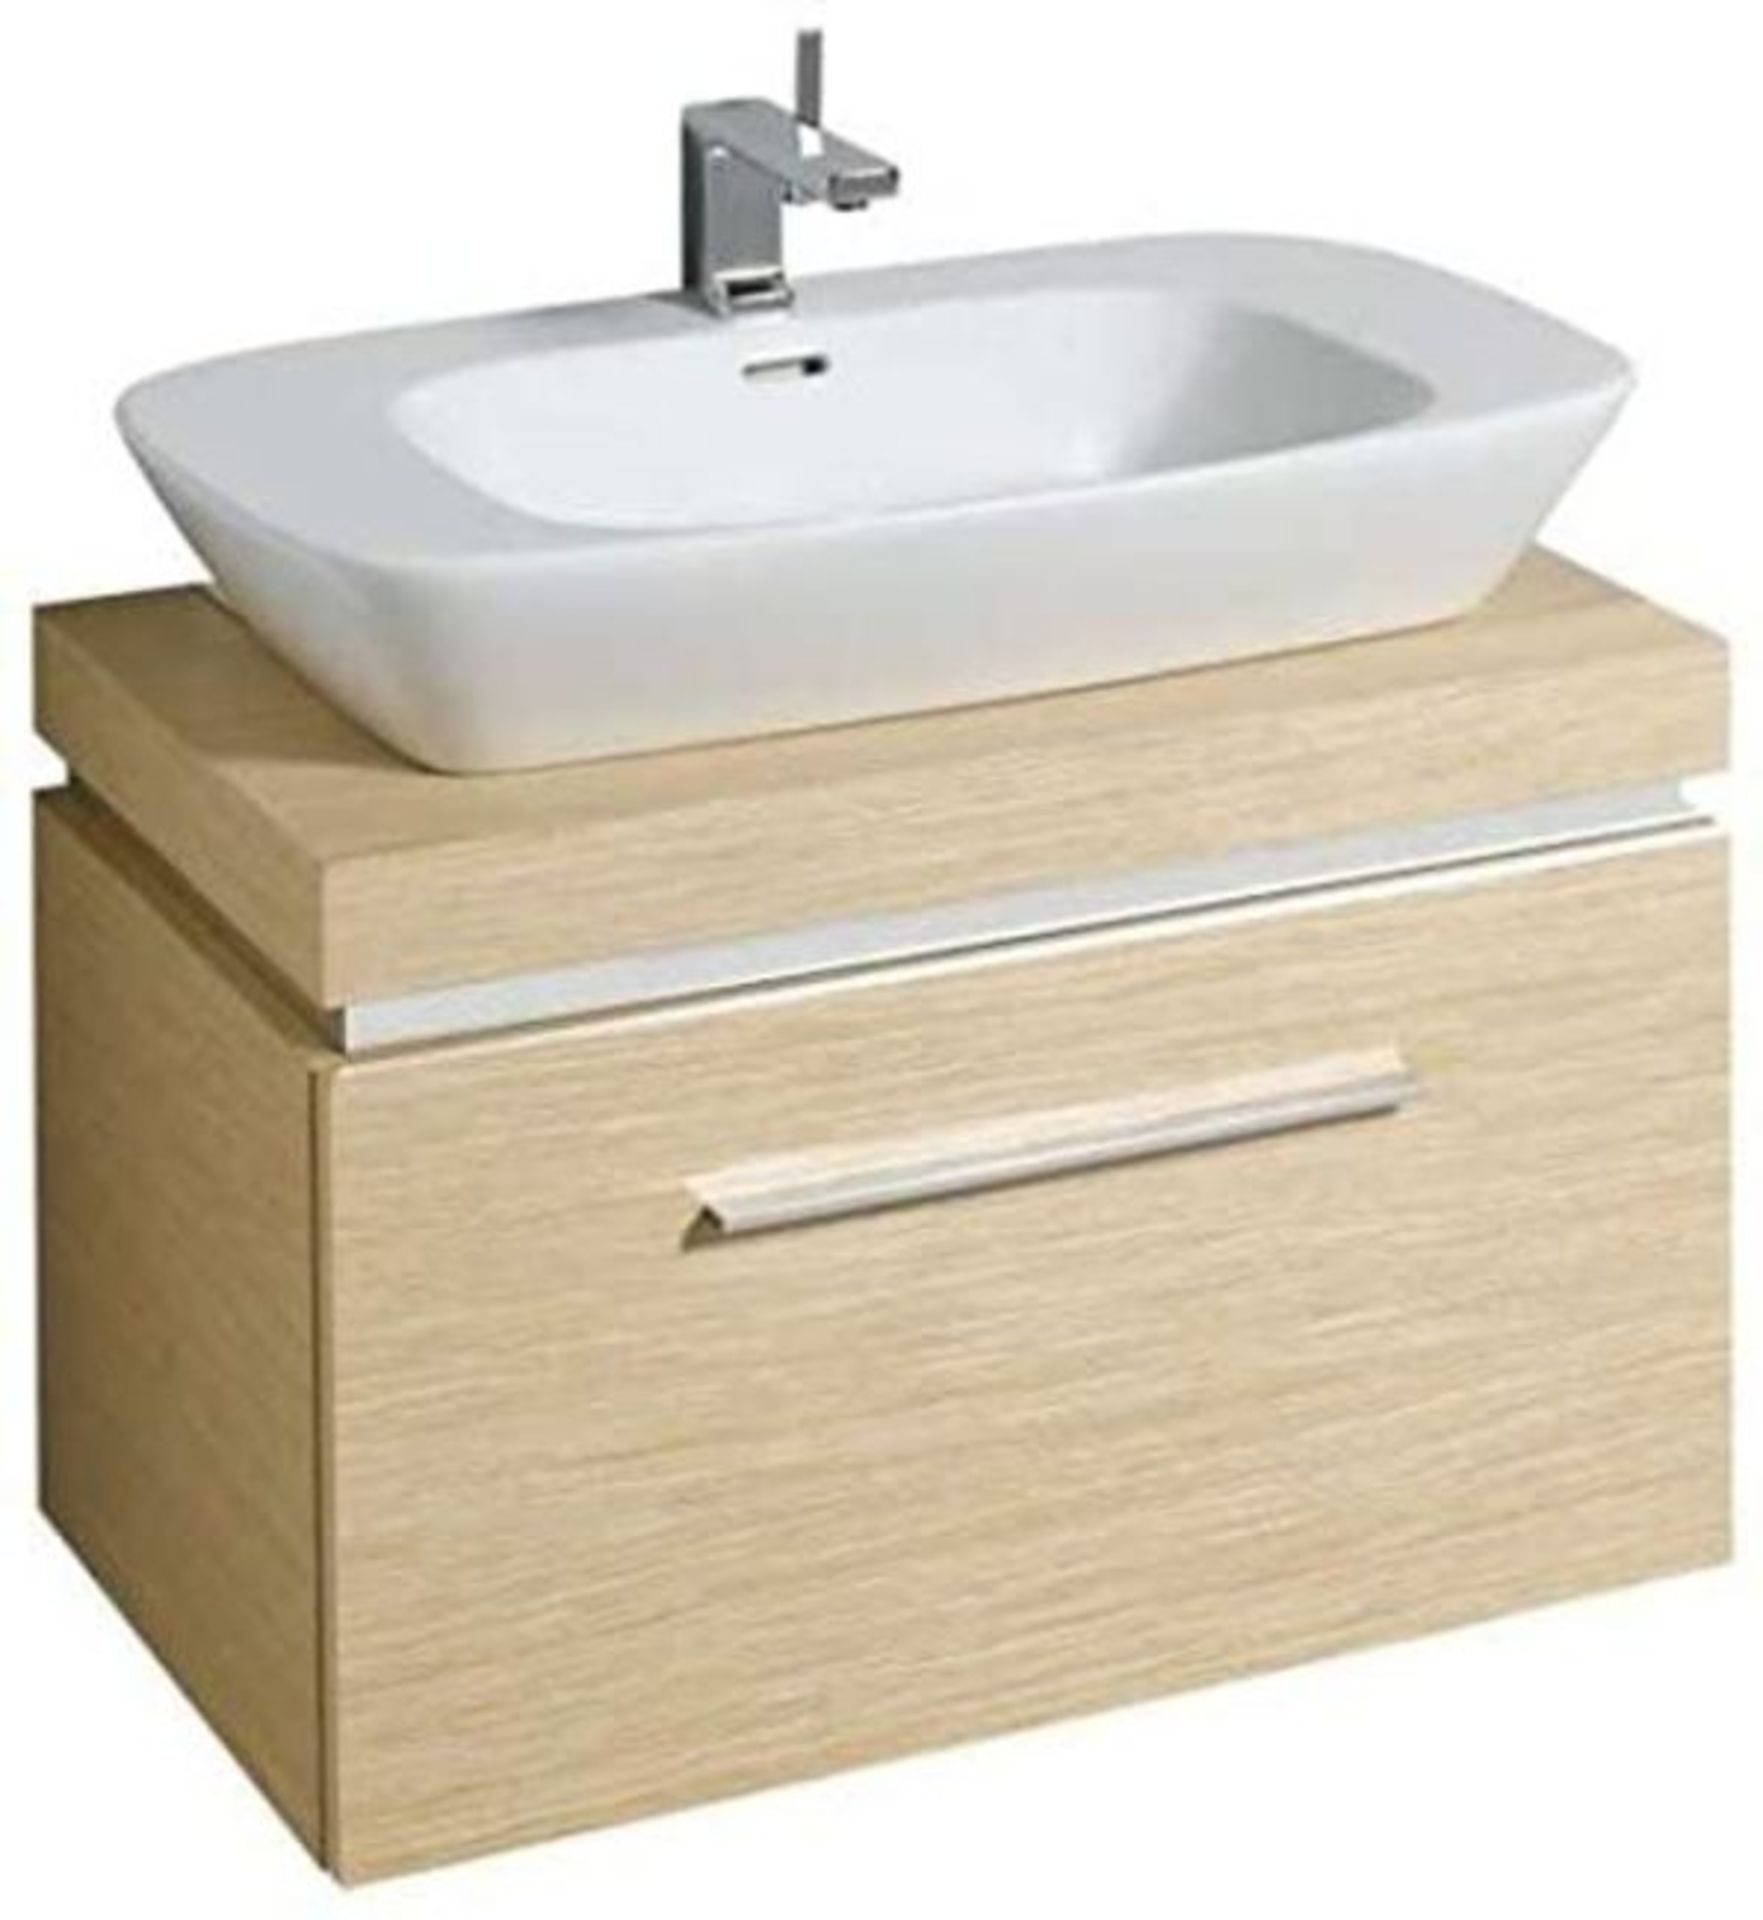 (SA23) NEW Keramag Geberit 800mm Oak White Vanity Unit.RRP £1,185.99.Comes complete with basin...